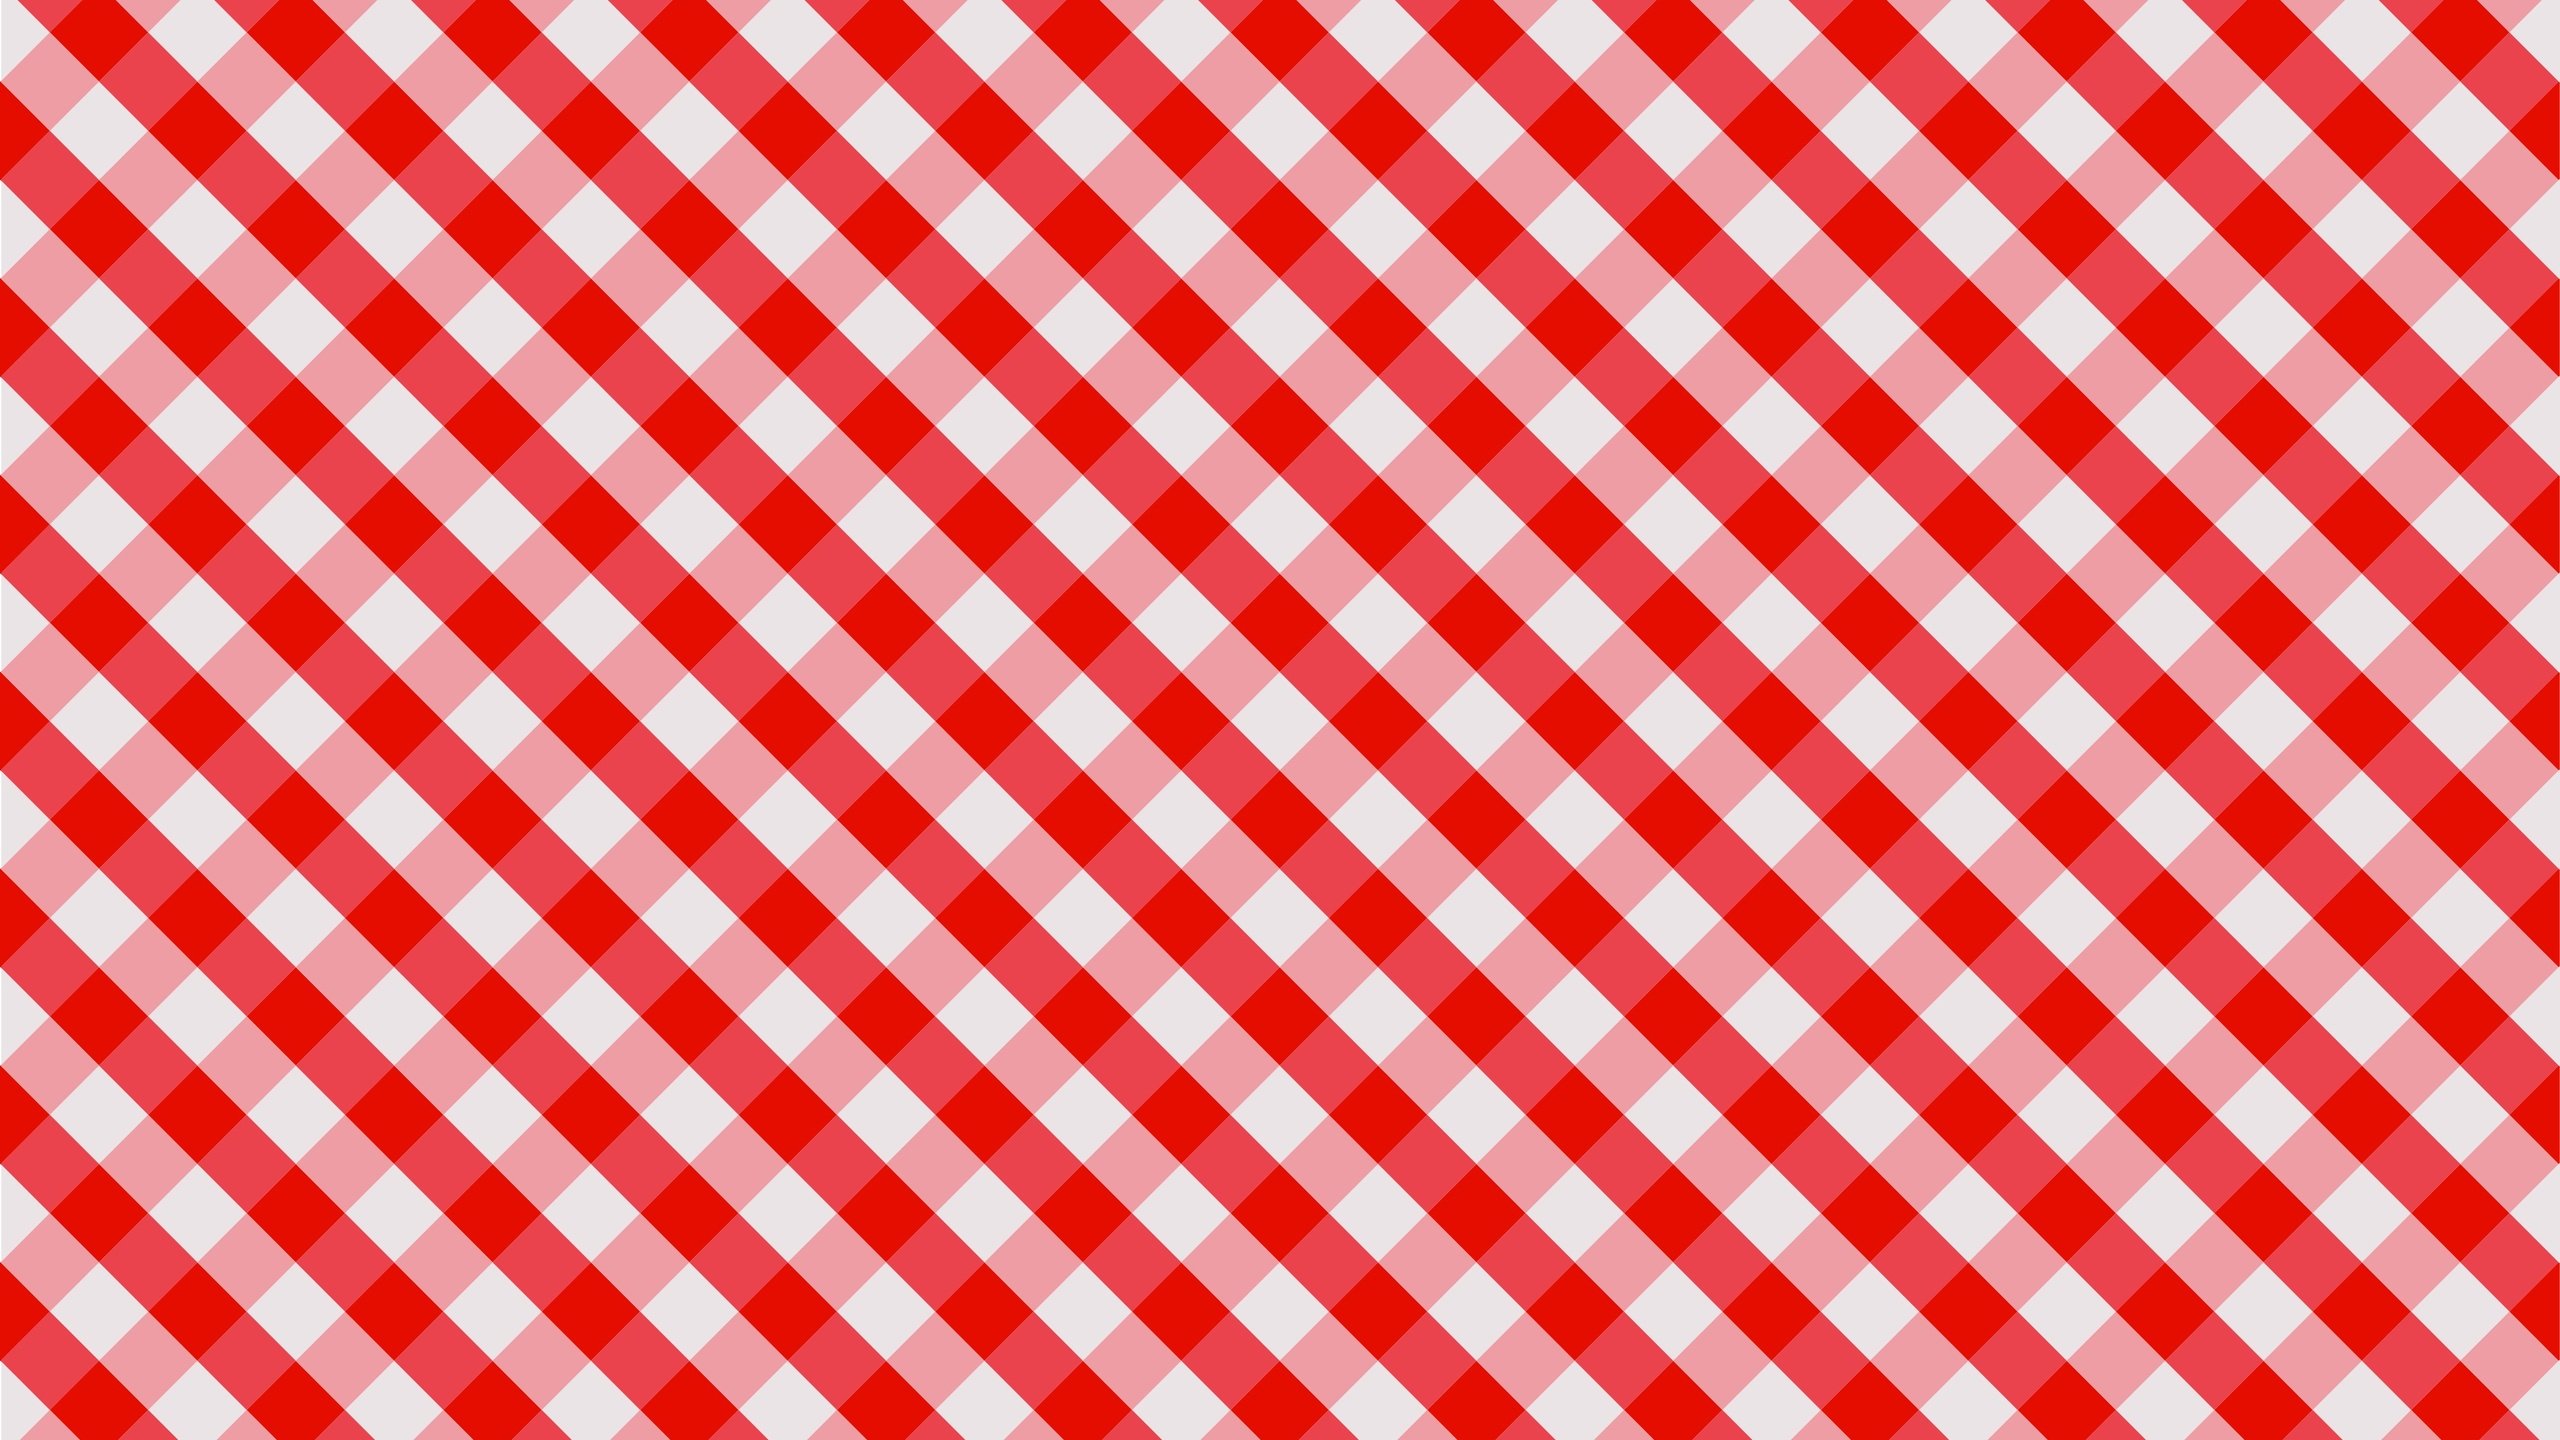 Red and White Checkered Textile. Wallpaper in 2560x1440 Resolution